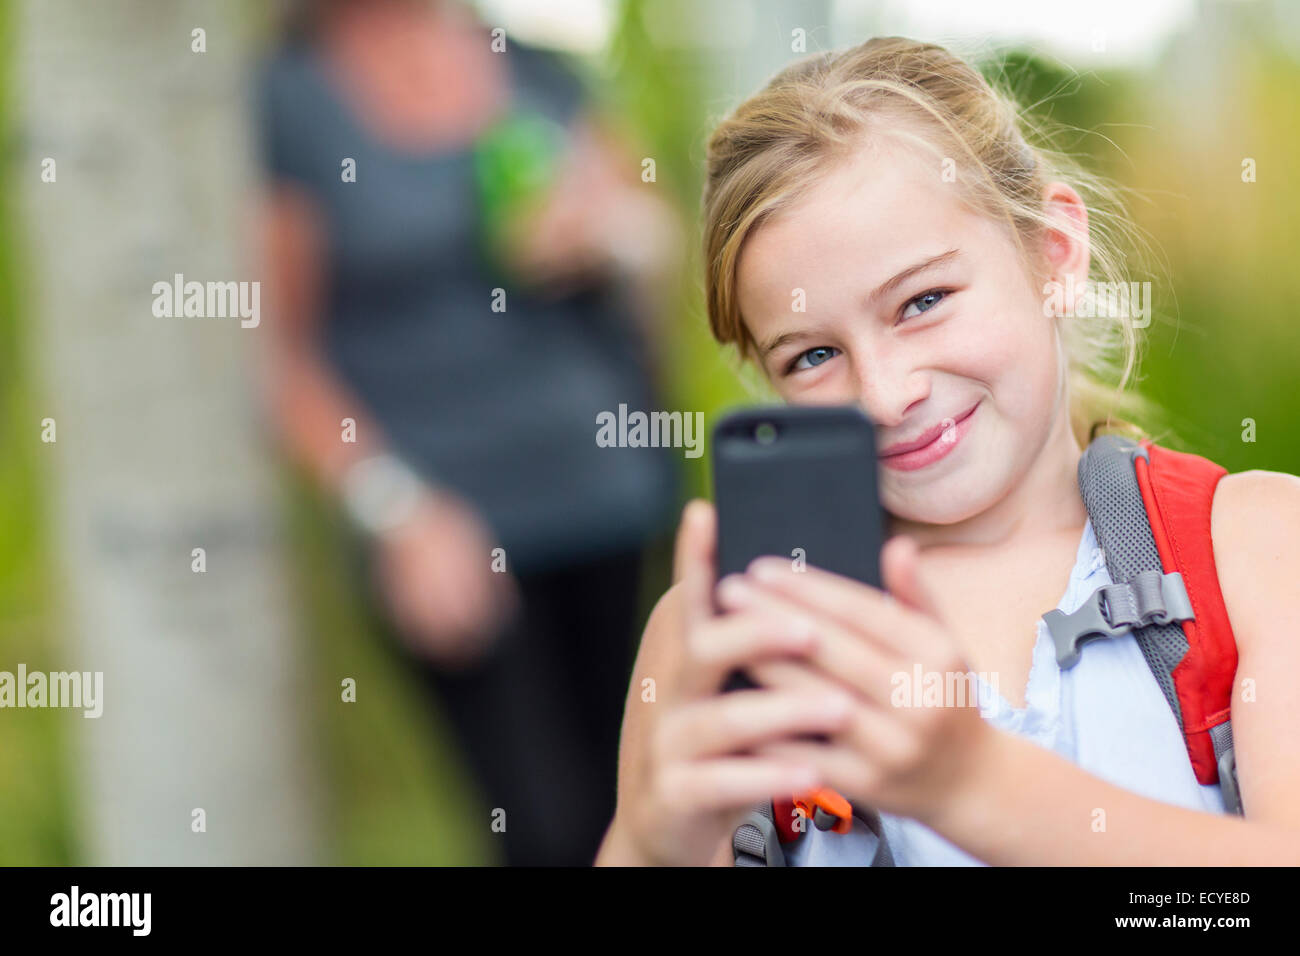 Caucasian girl taking cell phone photograph in forest Stock Photo